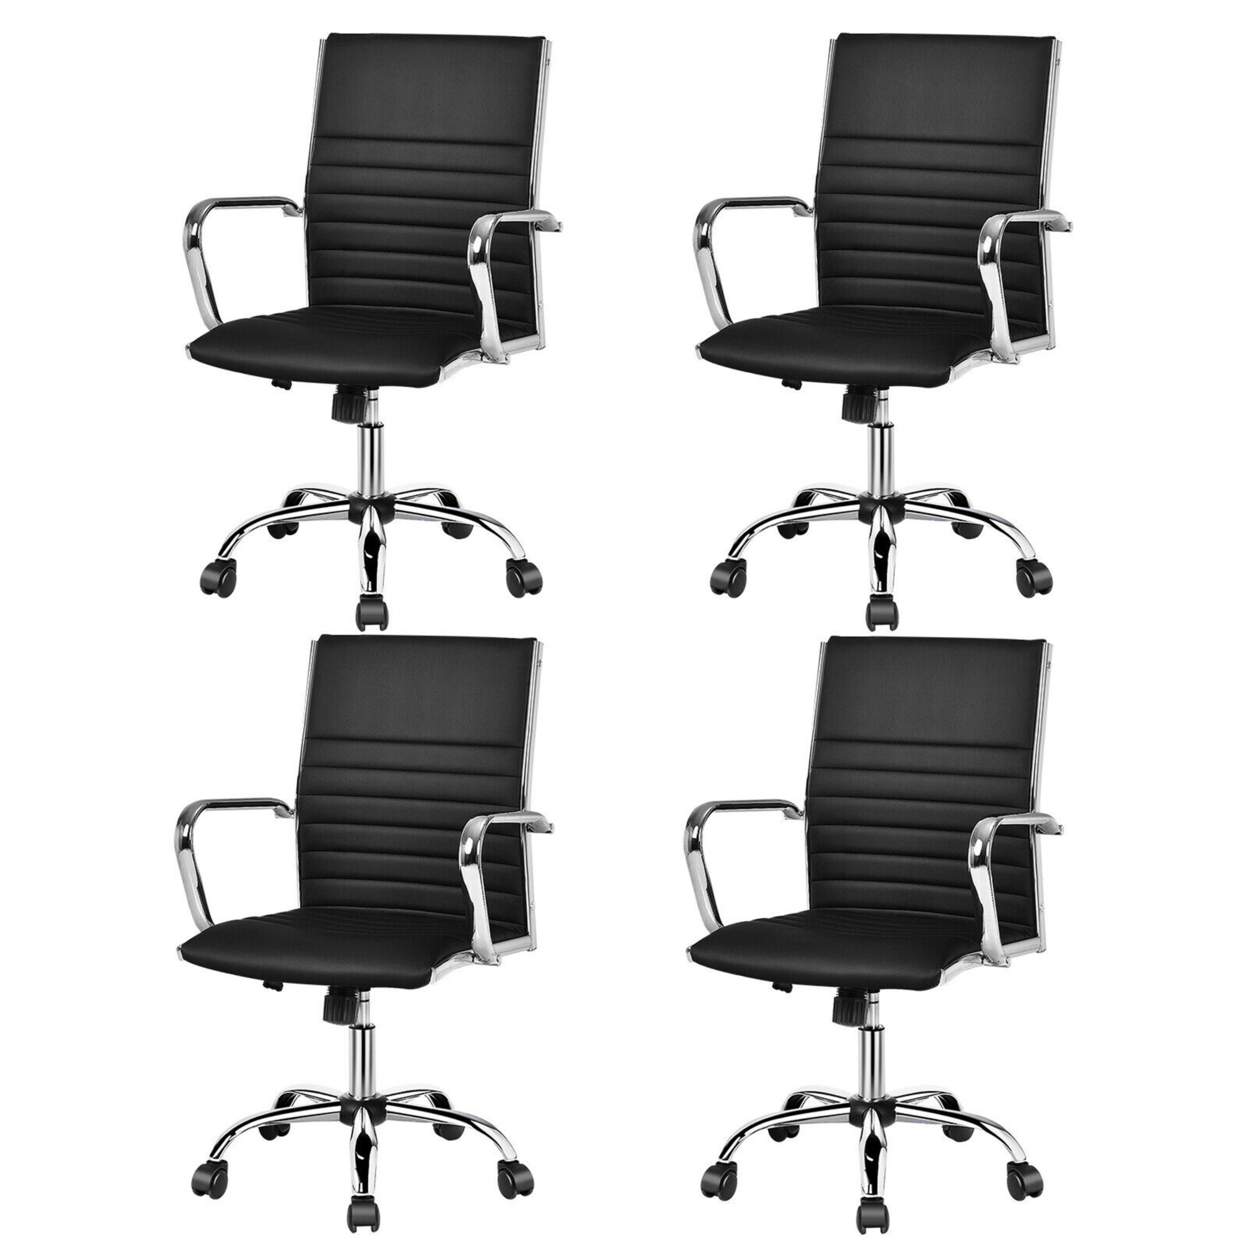 PU Leather Office Chair High Back Conference Task Chair W/Armrests - Black, 4 PCS